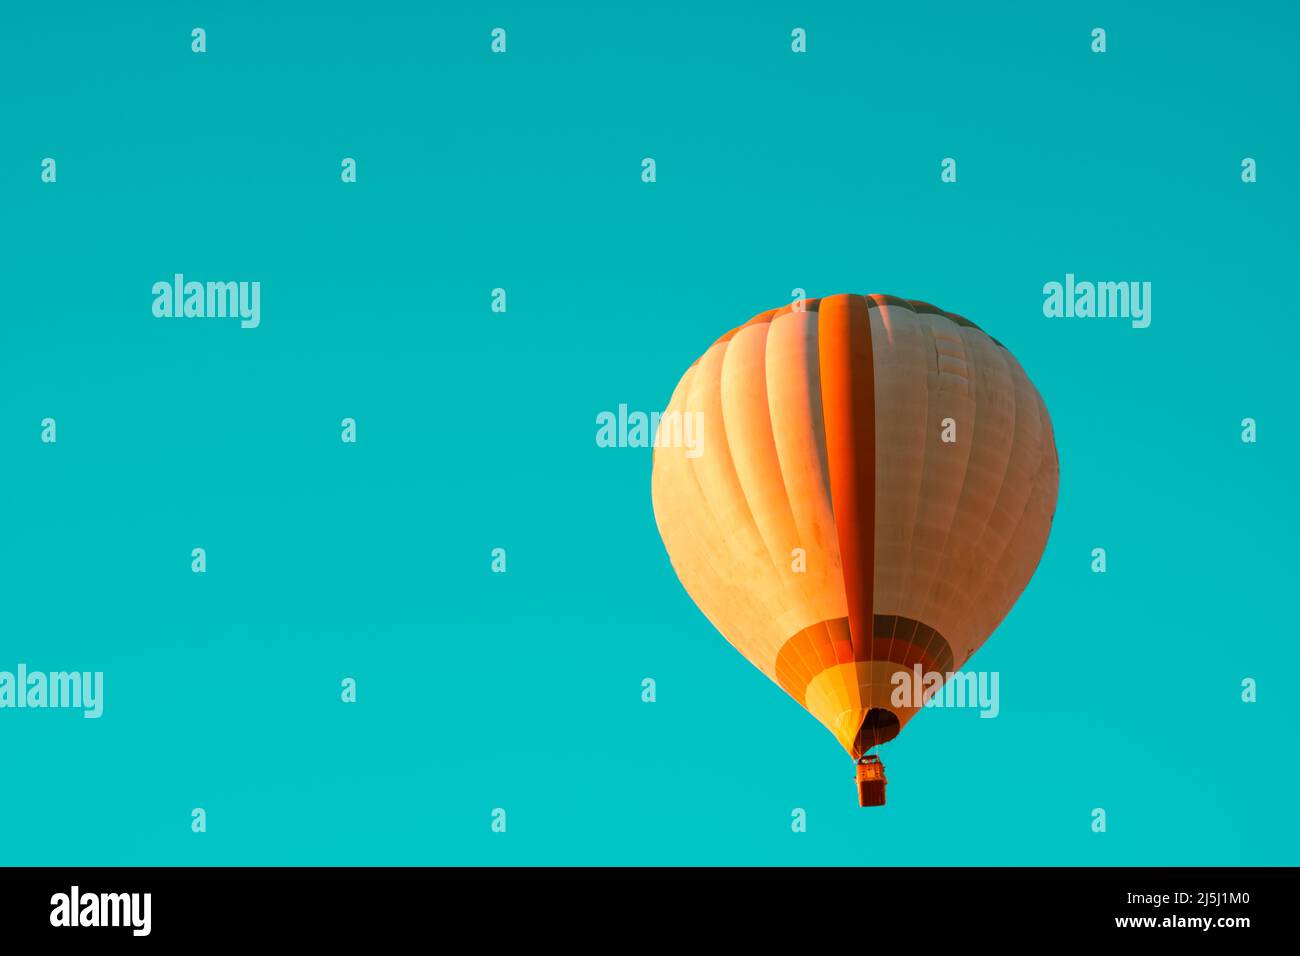 Hot air balloon isolated on turquoise background. Ballooning festival or activity background photo. Stock Photo